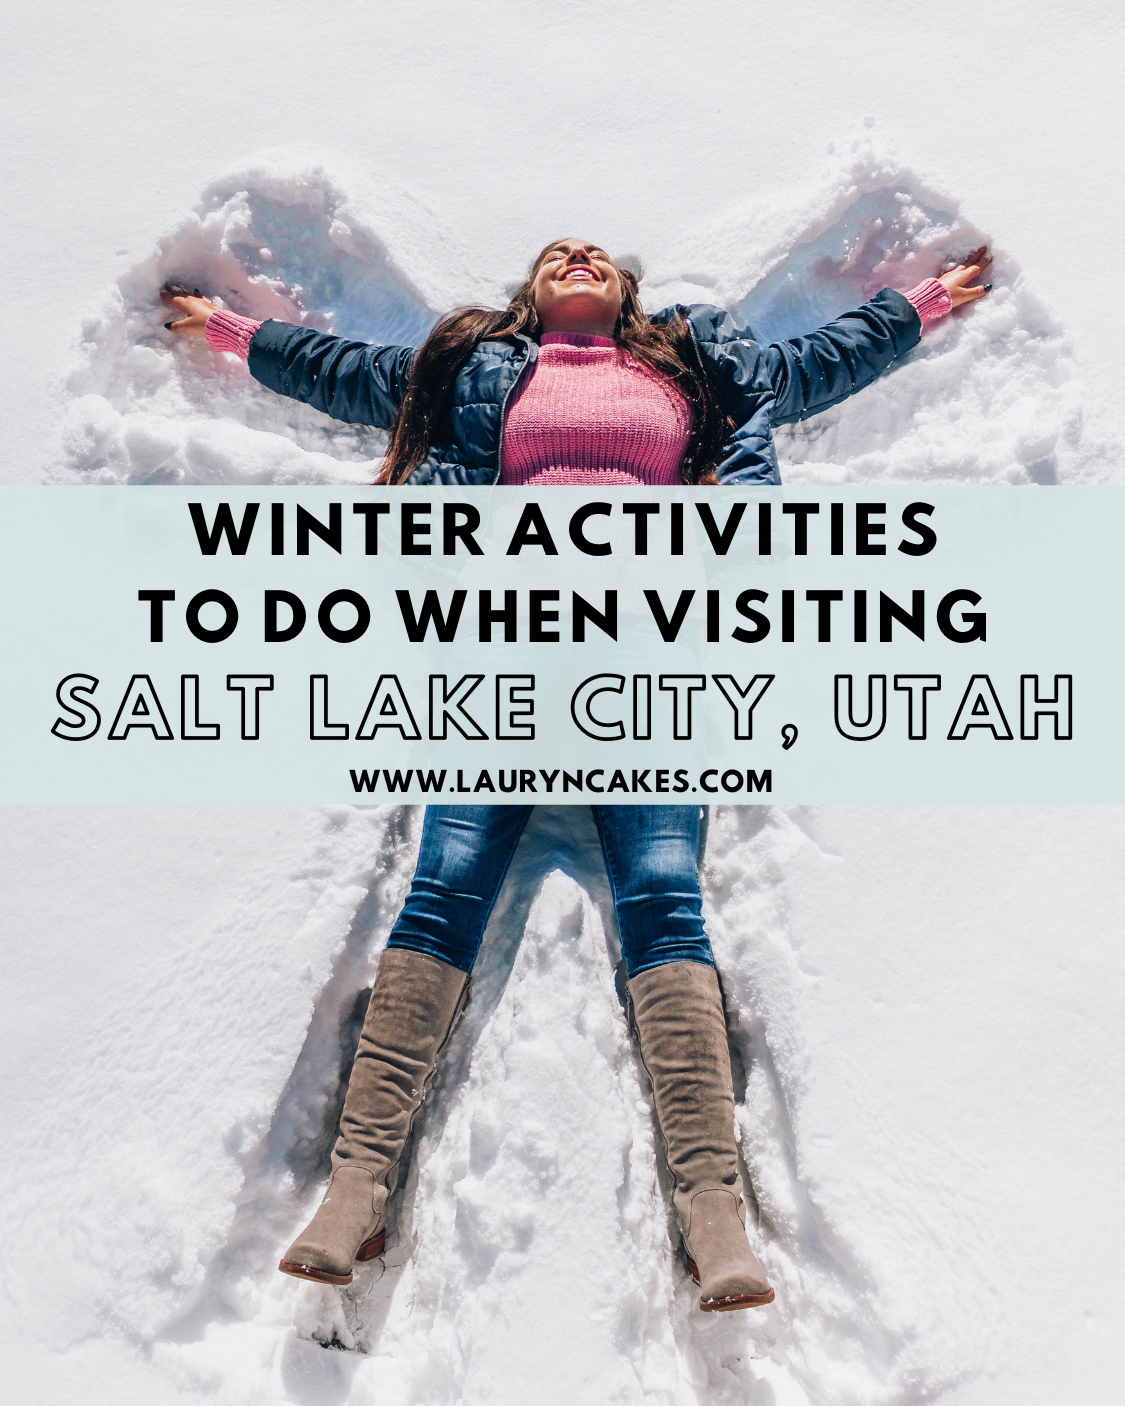 Winter Activities in Salt Lake City Utah Photo of woman in snow with writing that says "winter activities to do when visiting Salt Lake City, Utah www.lauryncakes.com"